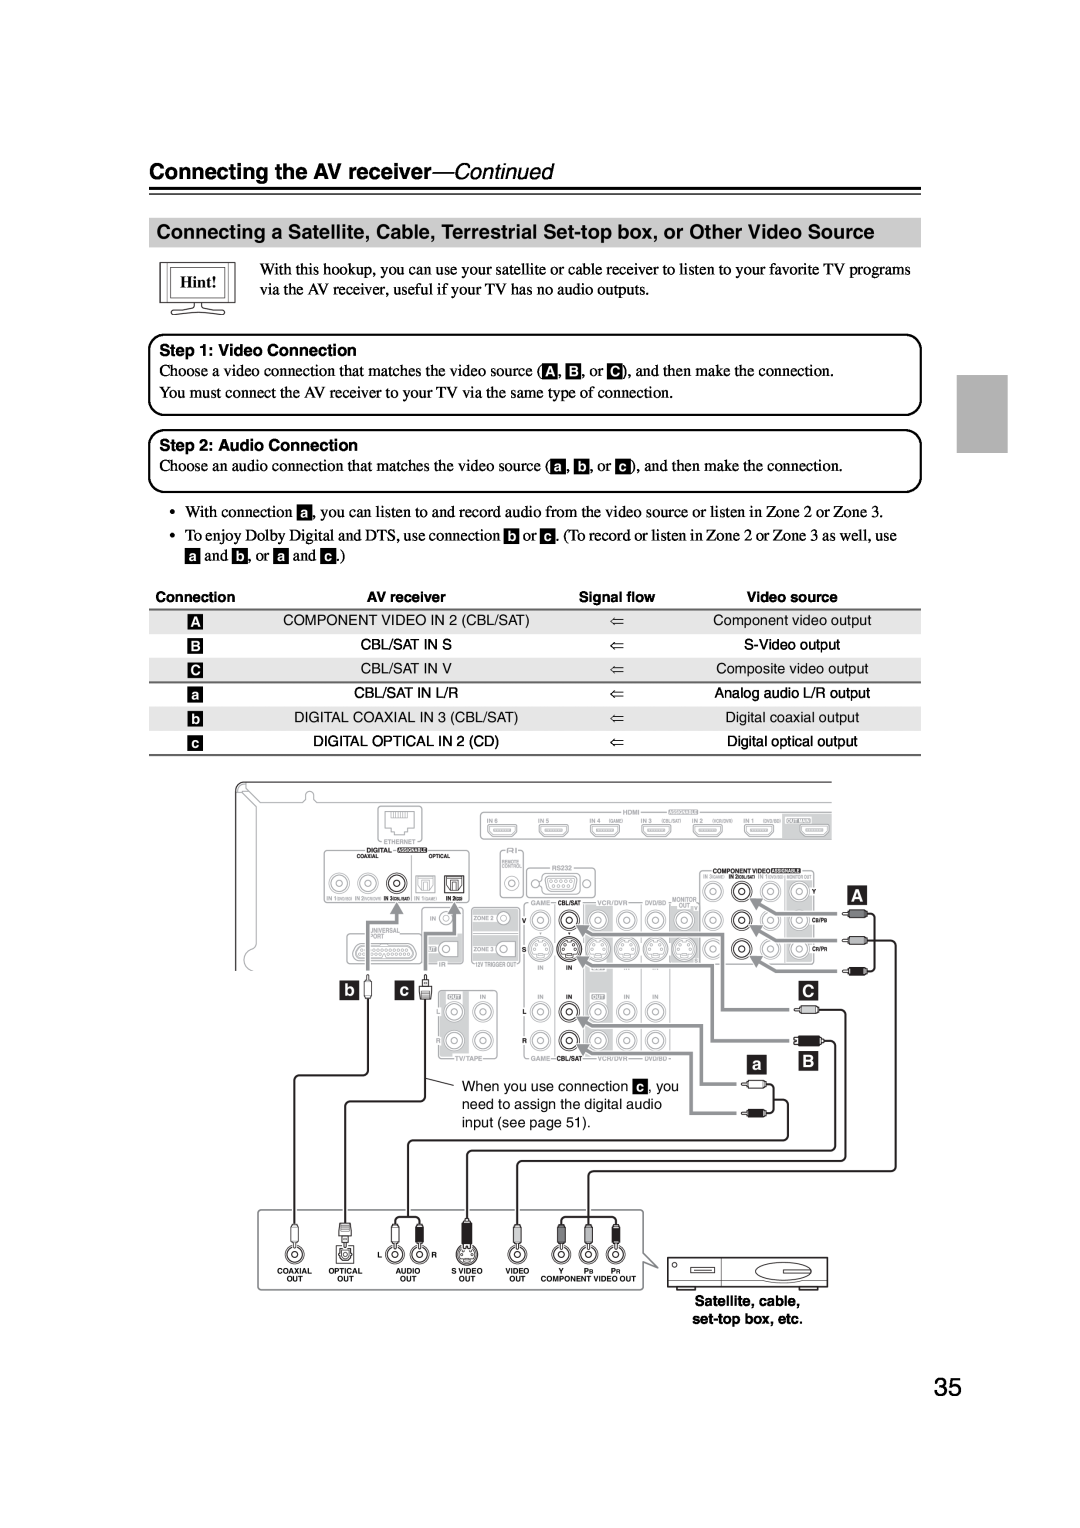 Onkyo TX-NR1007 instruction manual Connecting the AV receiver—Continued, Hint 